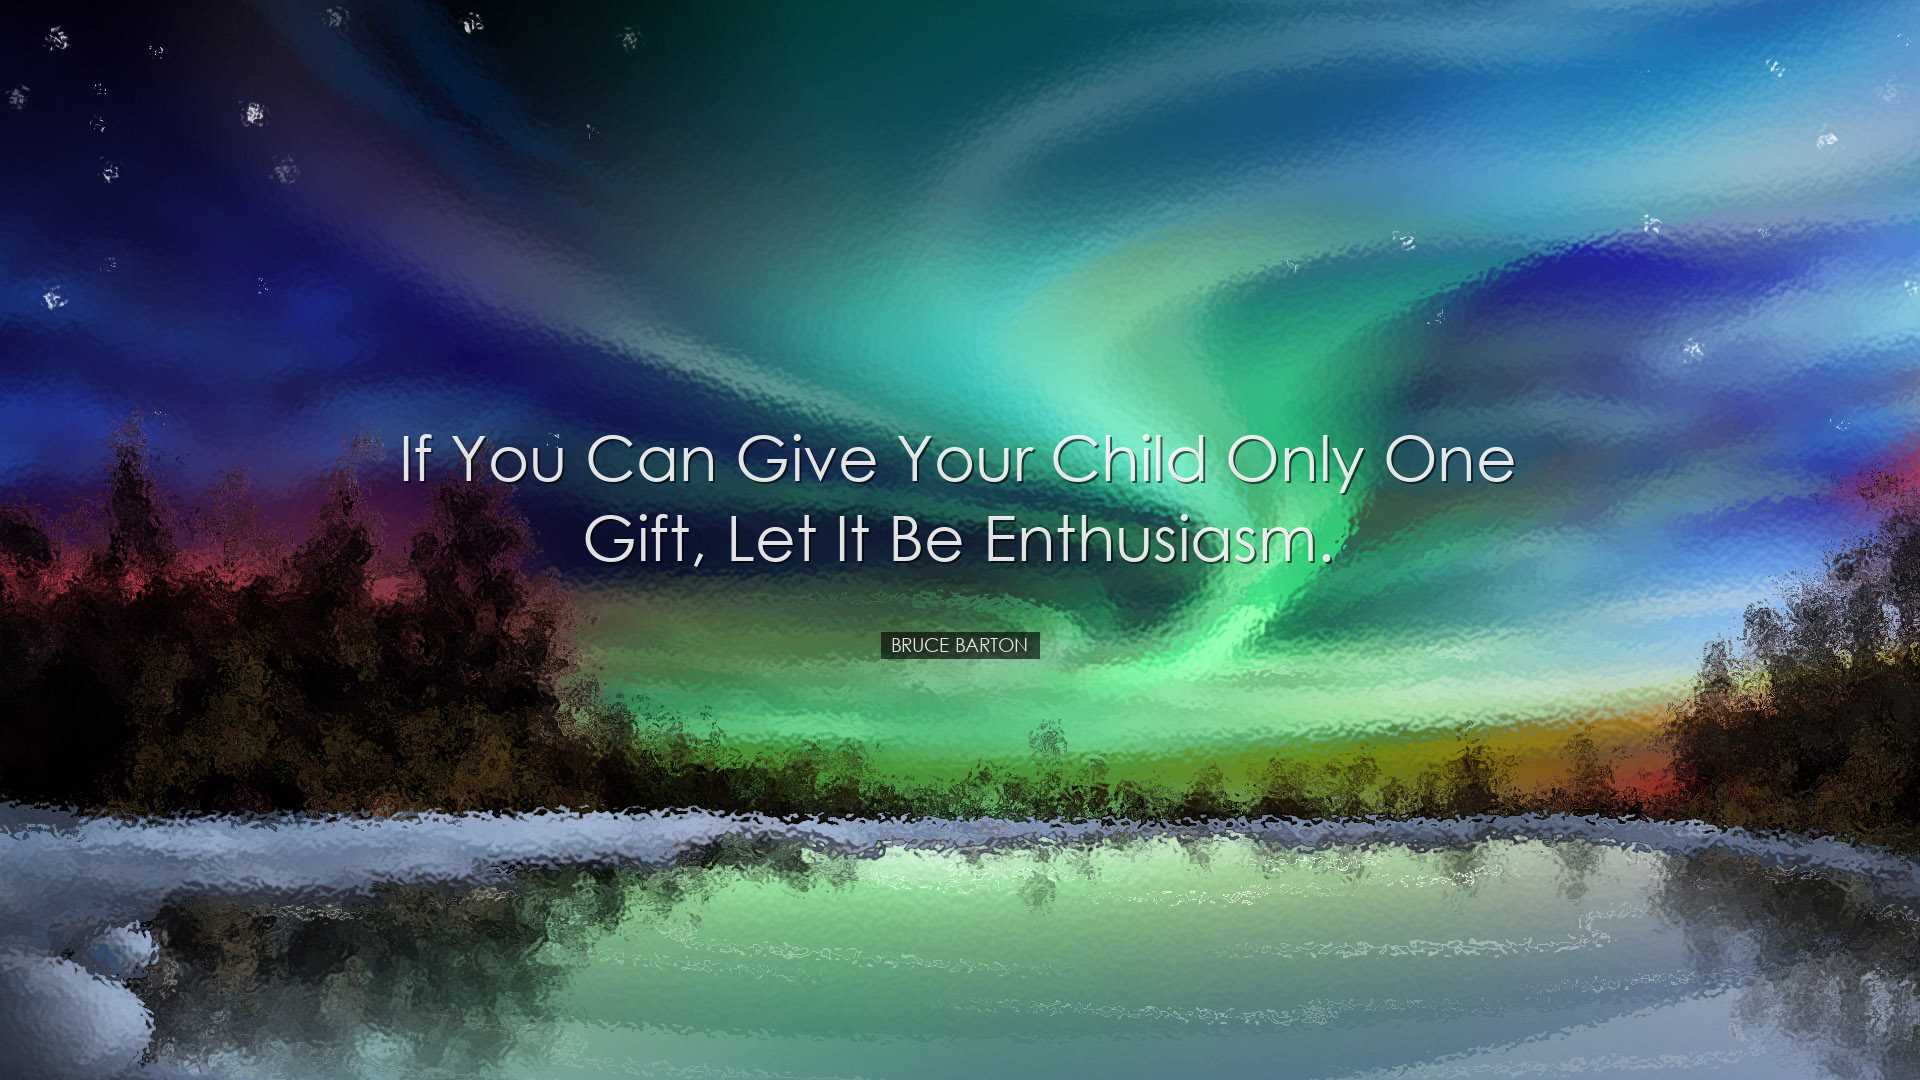 If you can give your child only one gift, let it be enthusiasm. -